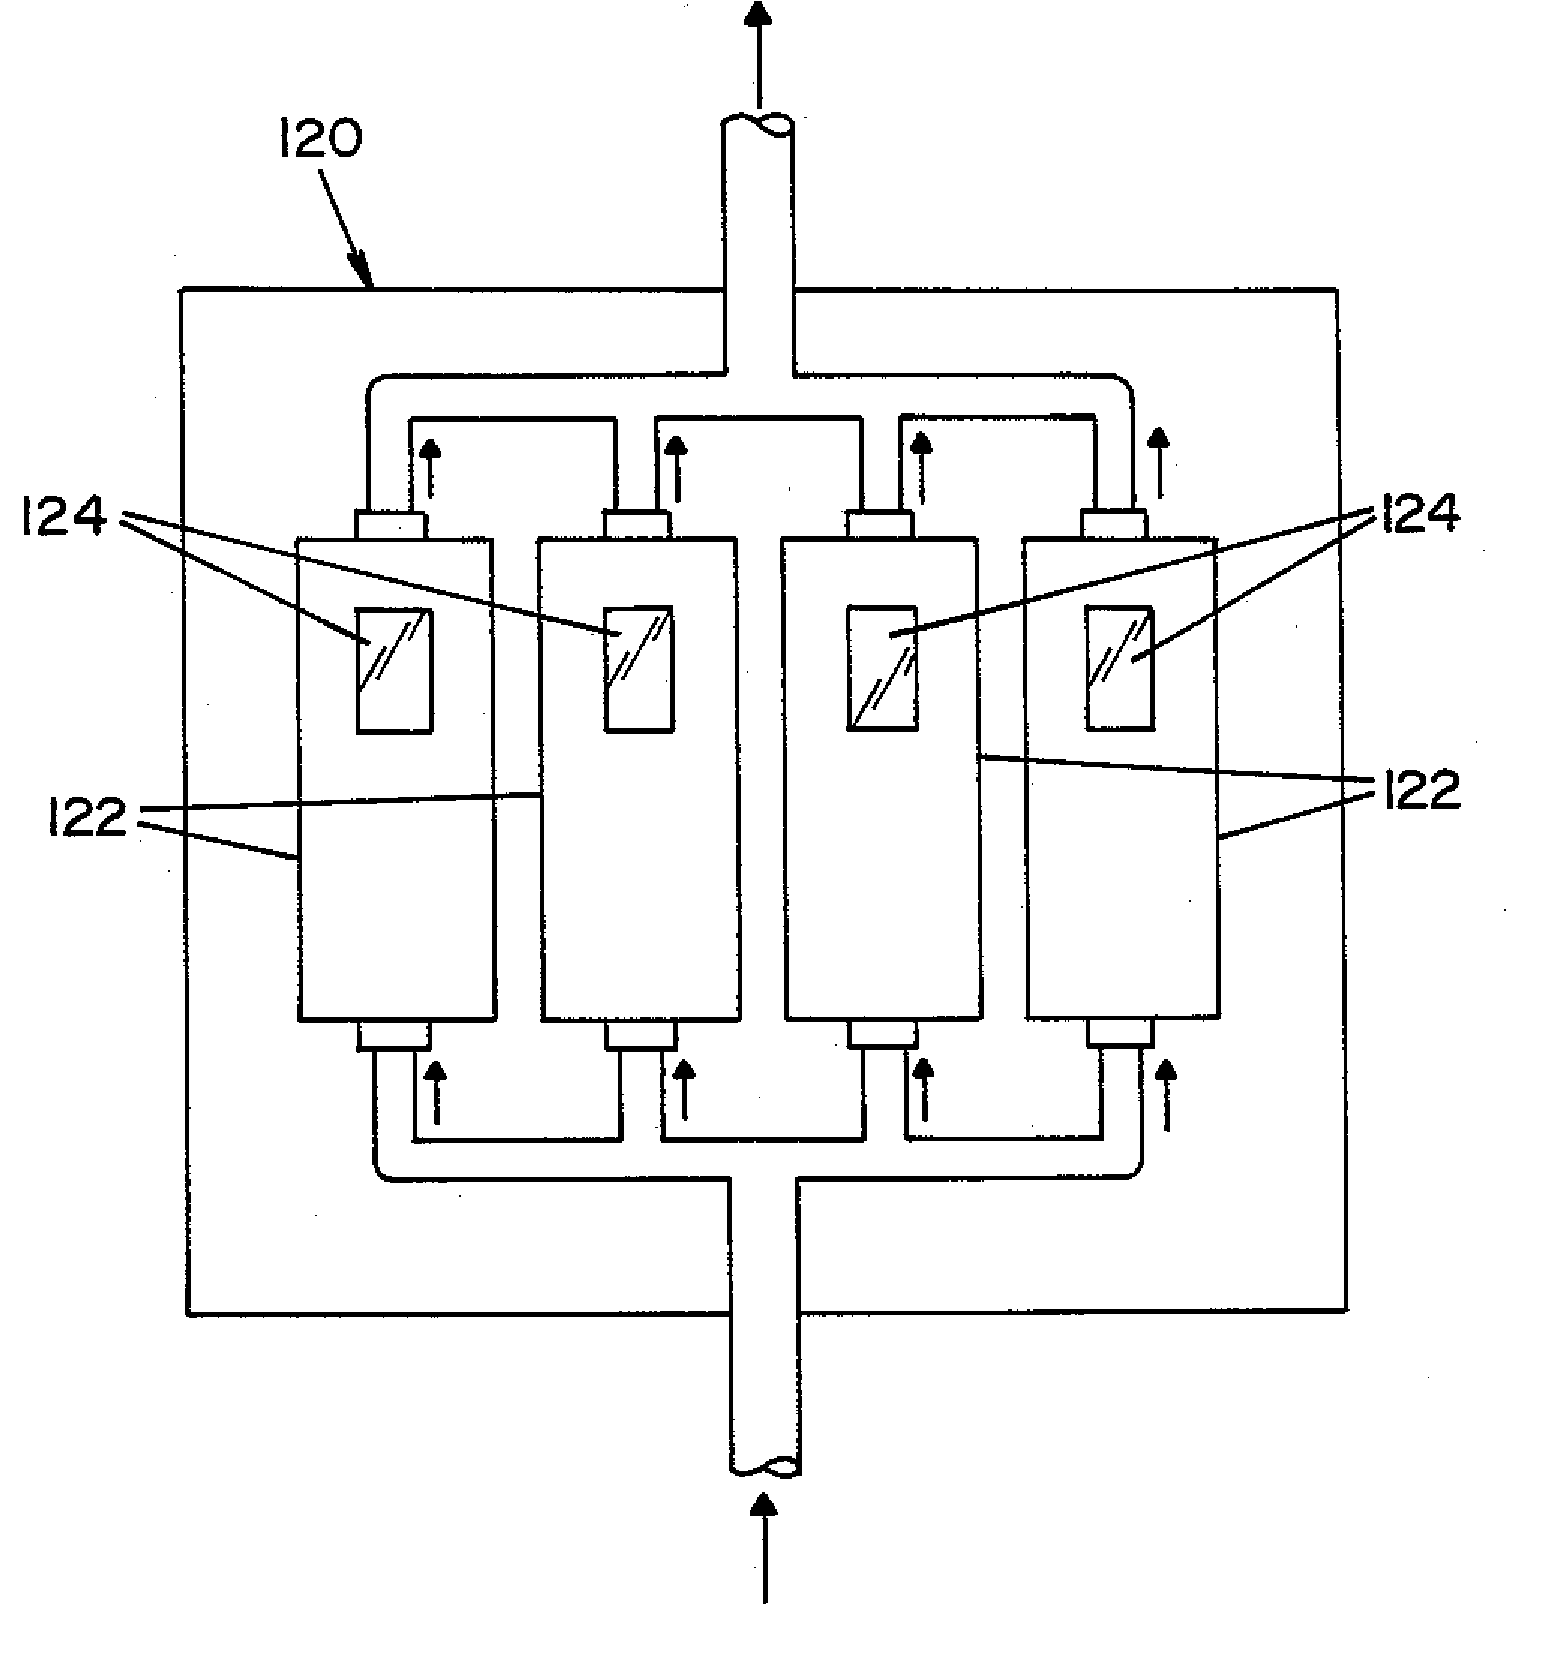 Method and apparatus for removal of vaporized hydrogen peroxide from a region